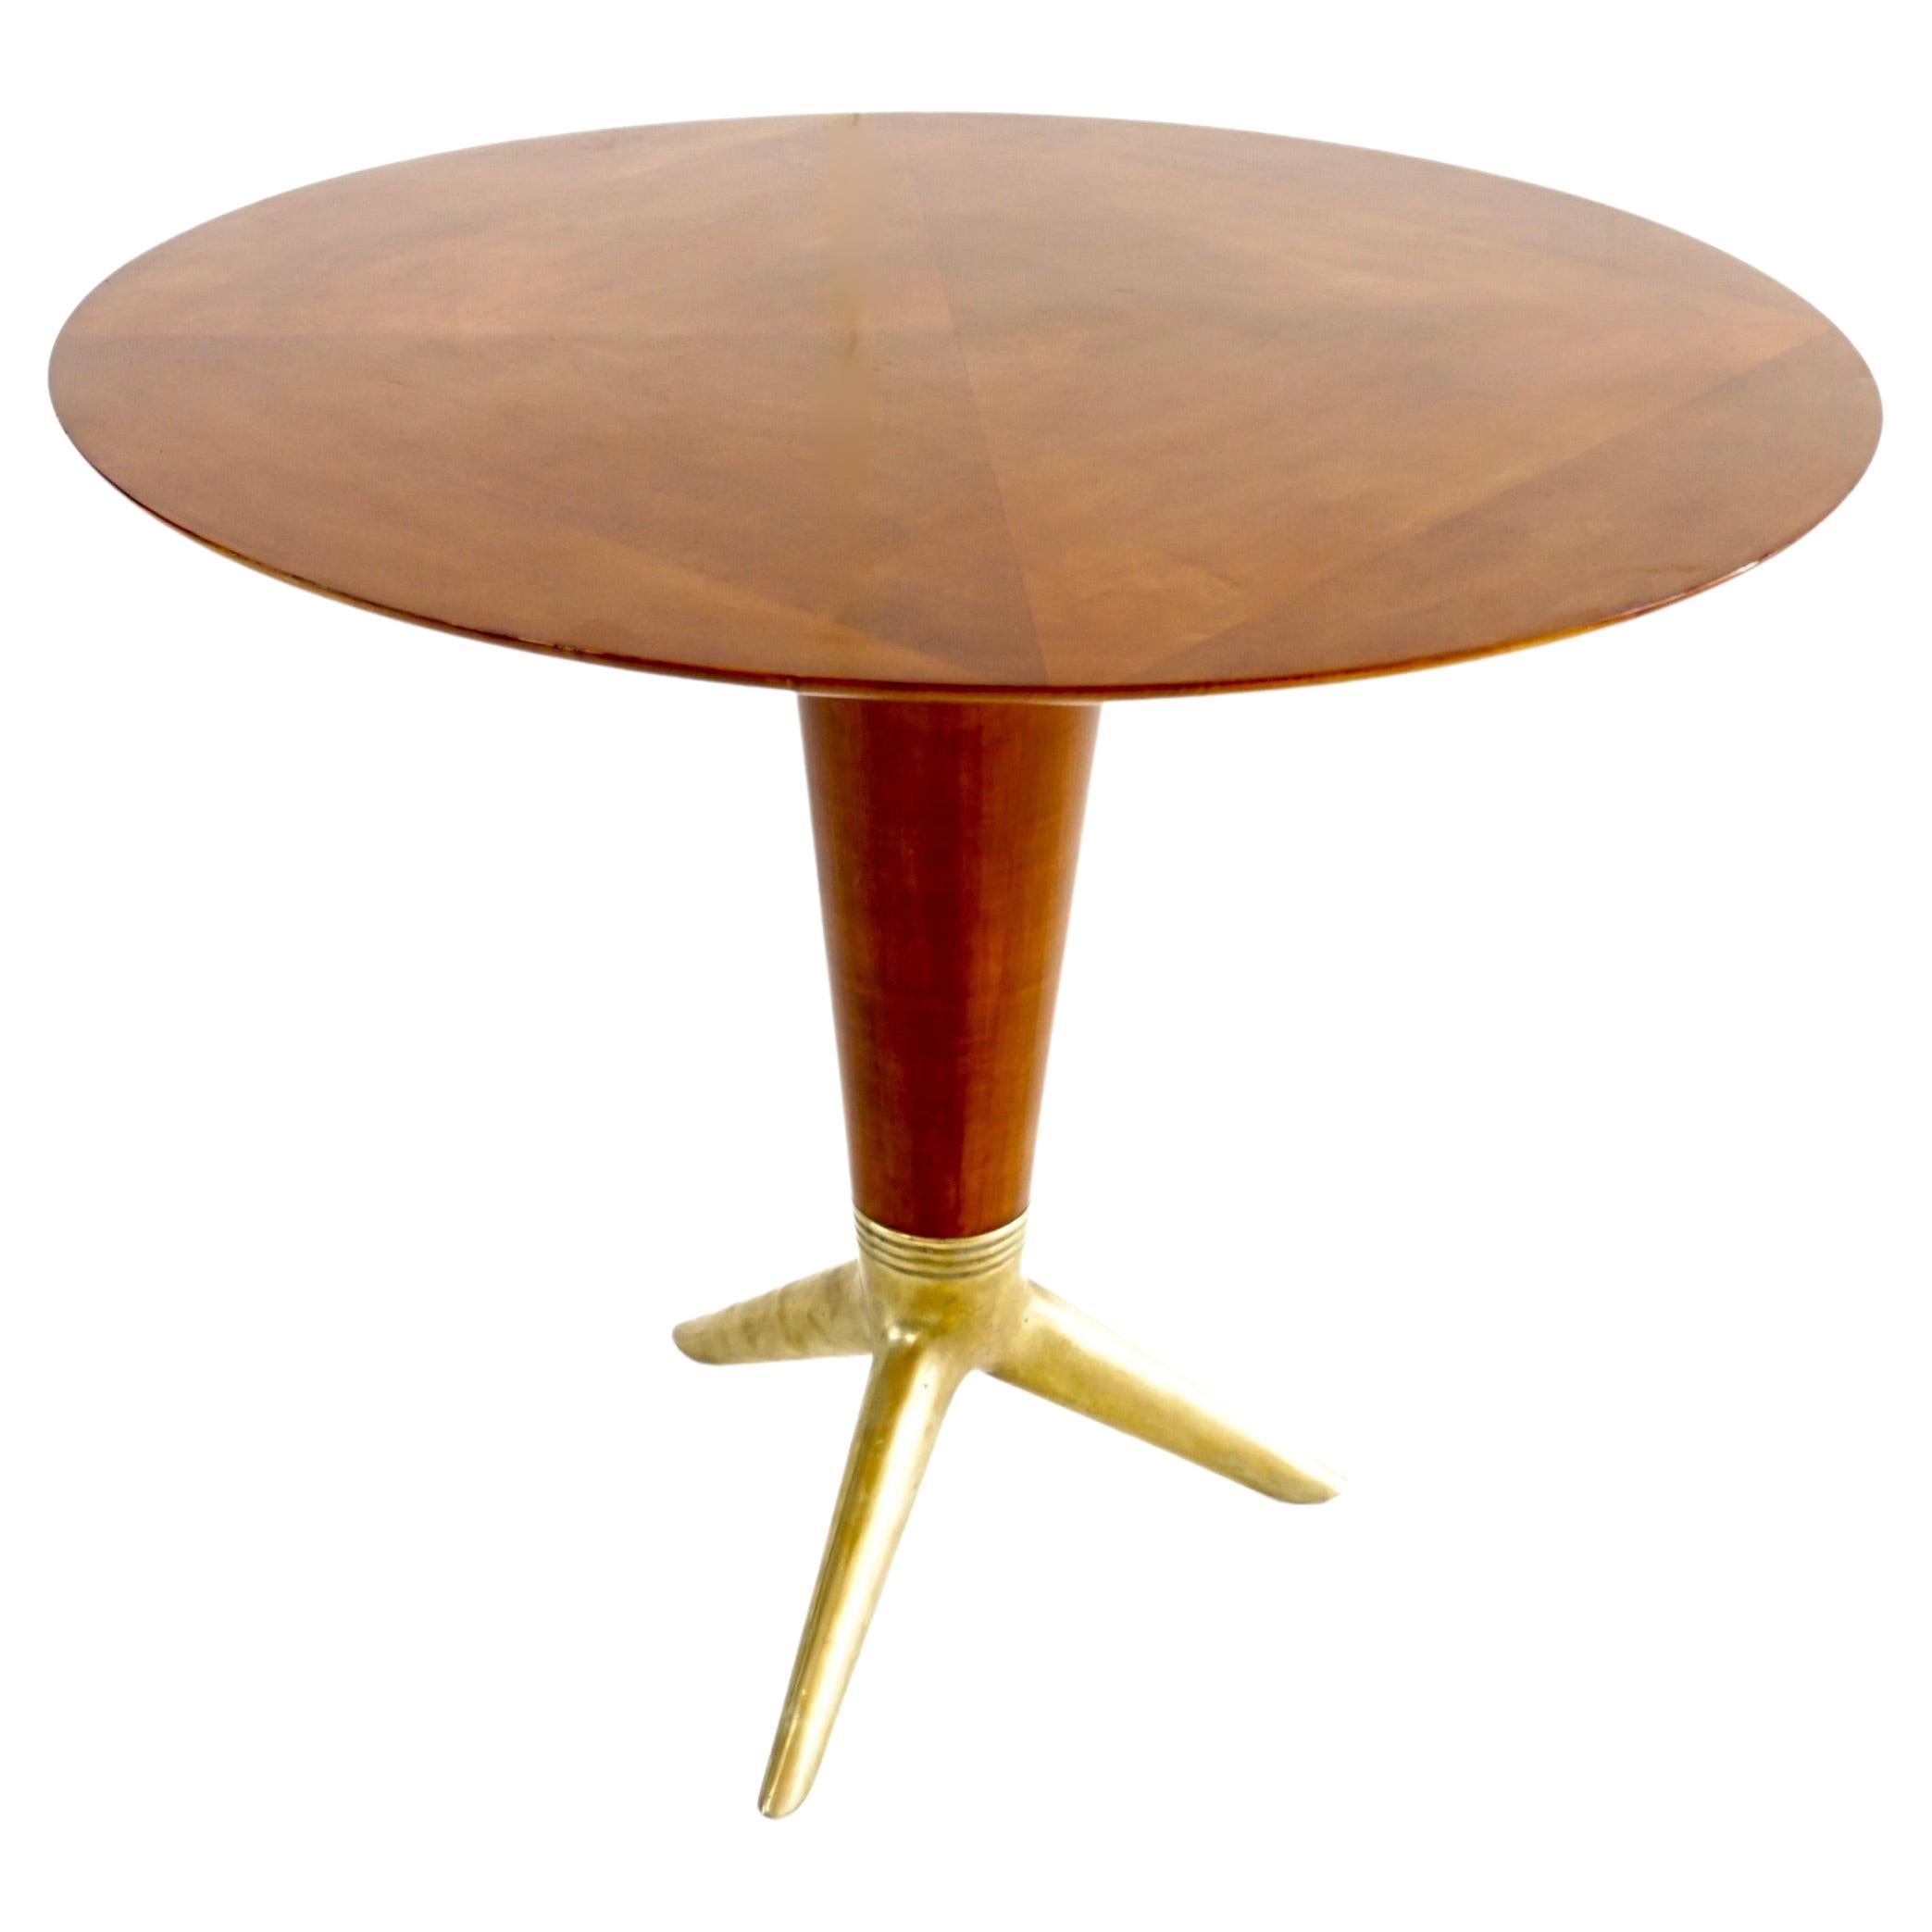 Rare Maple and Brass Round Center Table by I.S.A. Bergamo 1950 For Sale